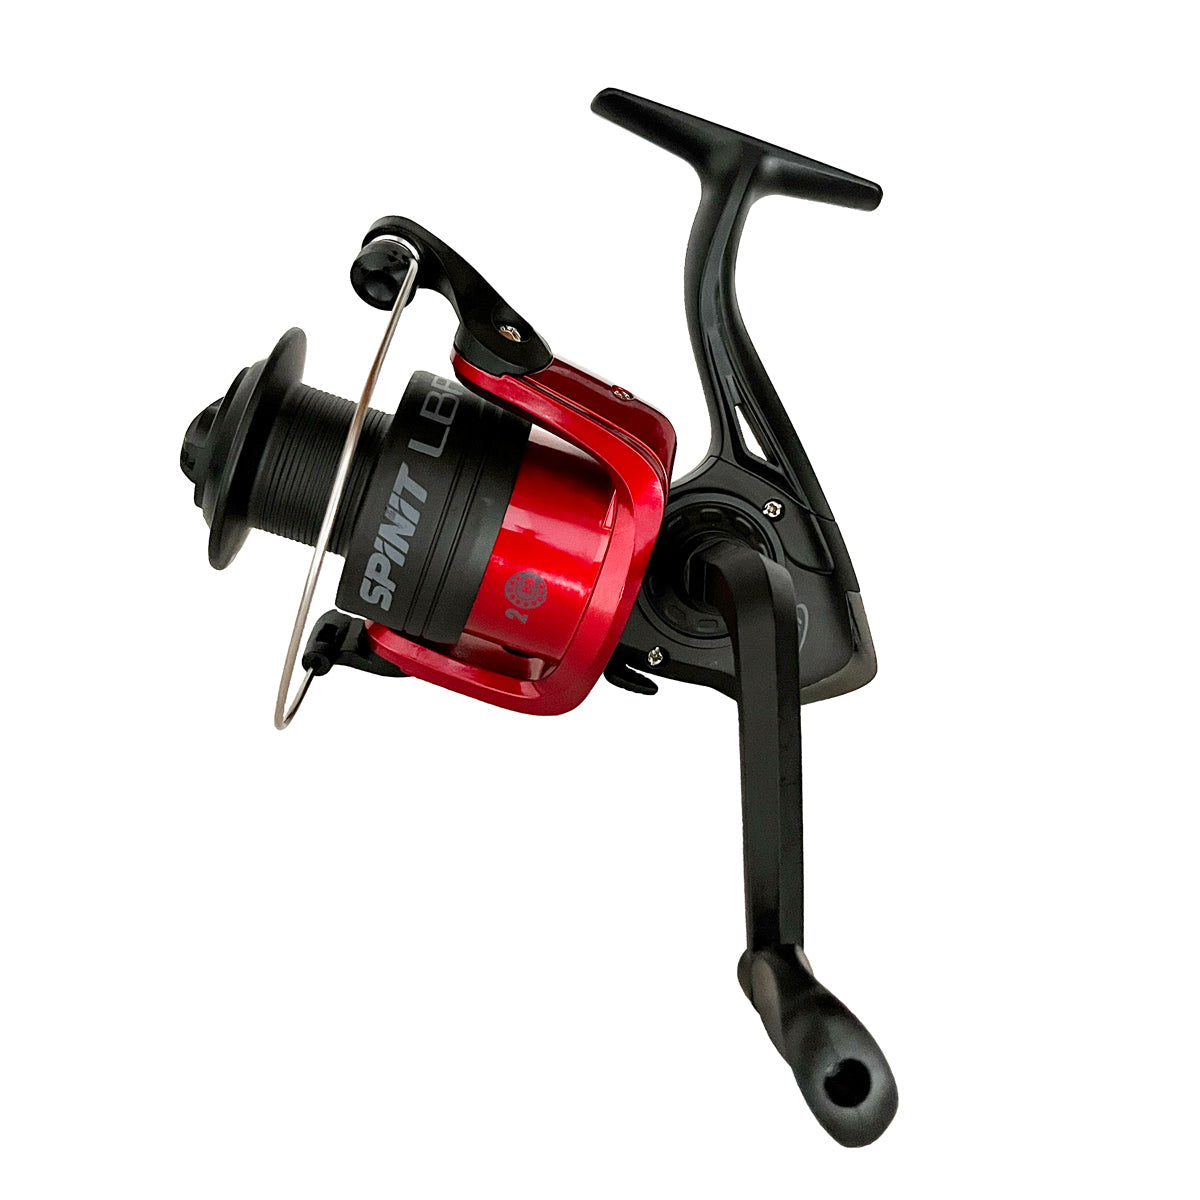 Reel frontal LBR 502 Spinning – Spinit